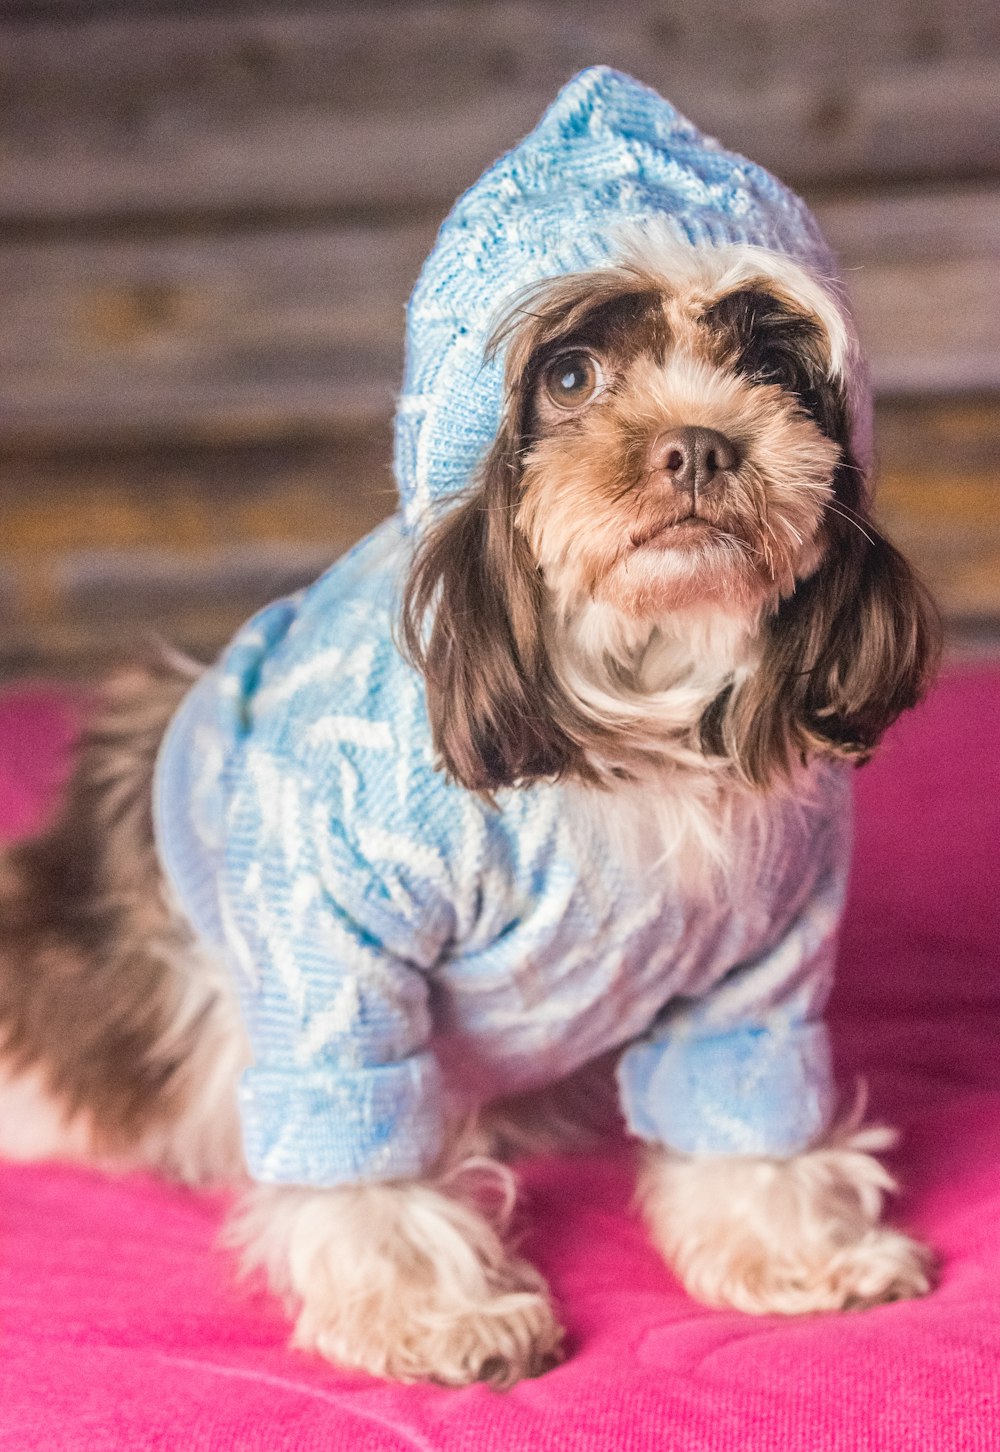 a small dog wearing a blue sweater and hat